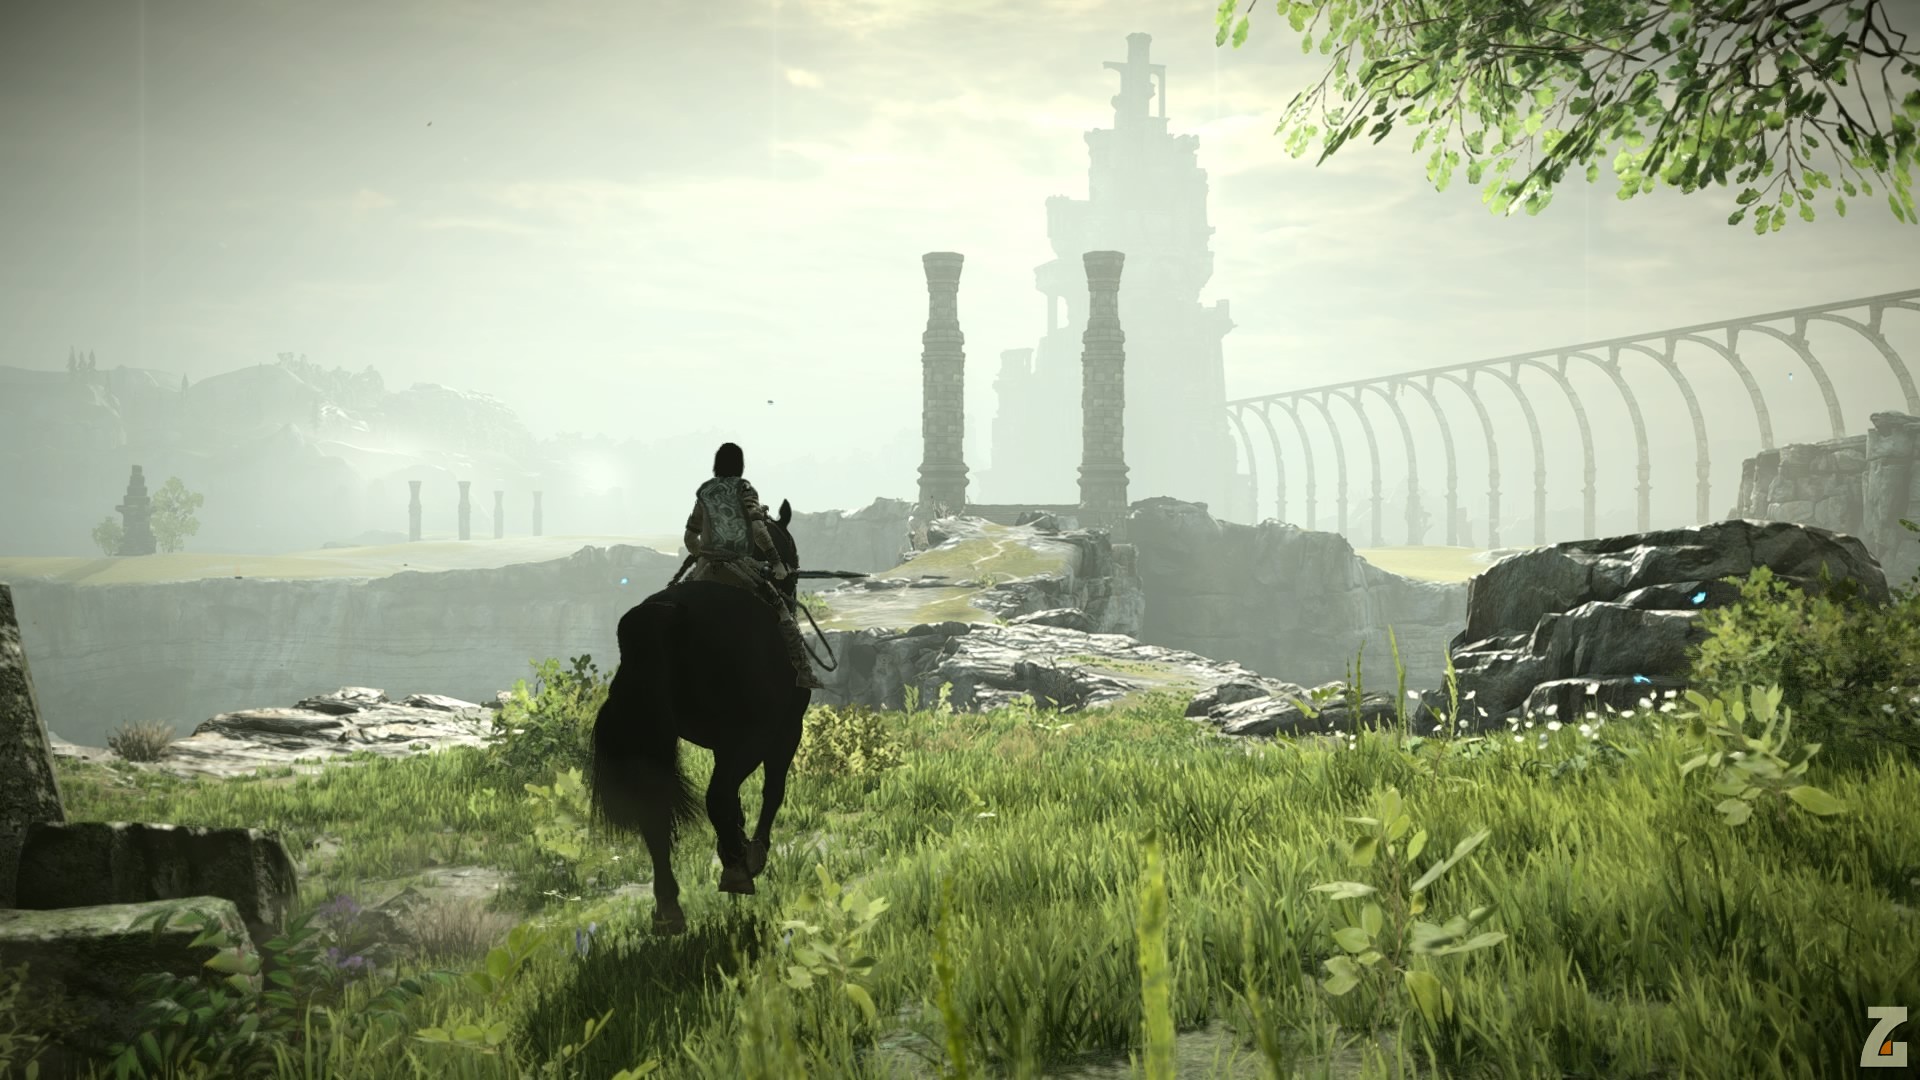 Shadow of colossus pc